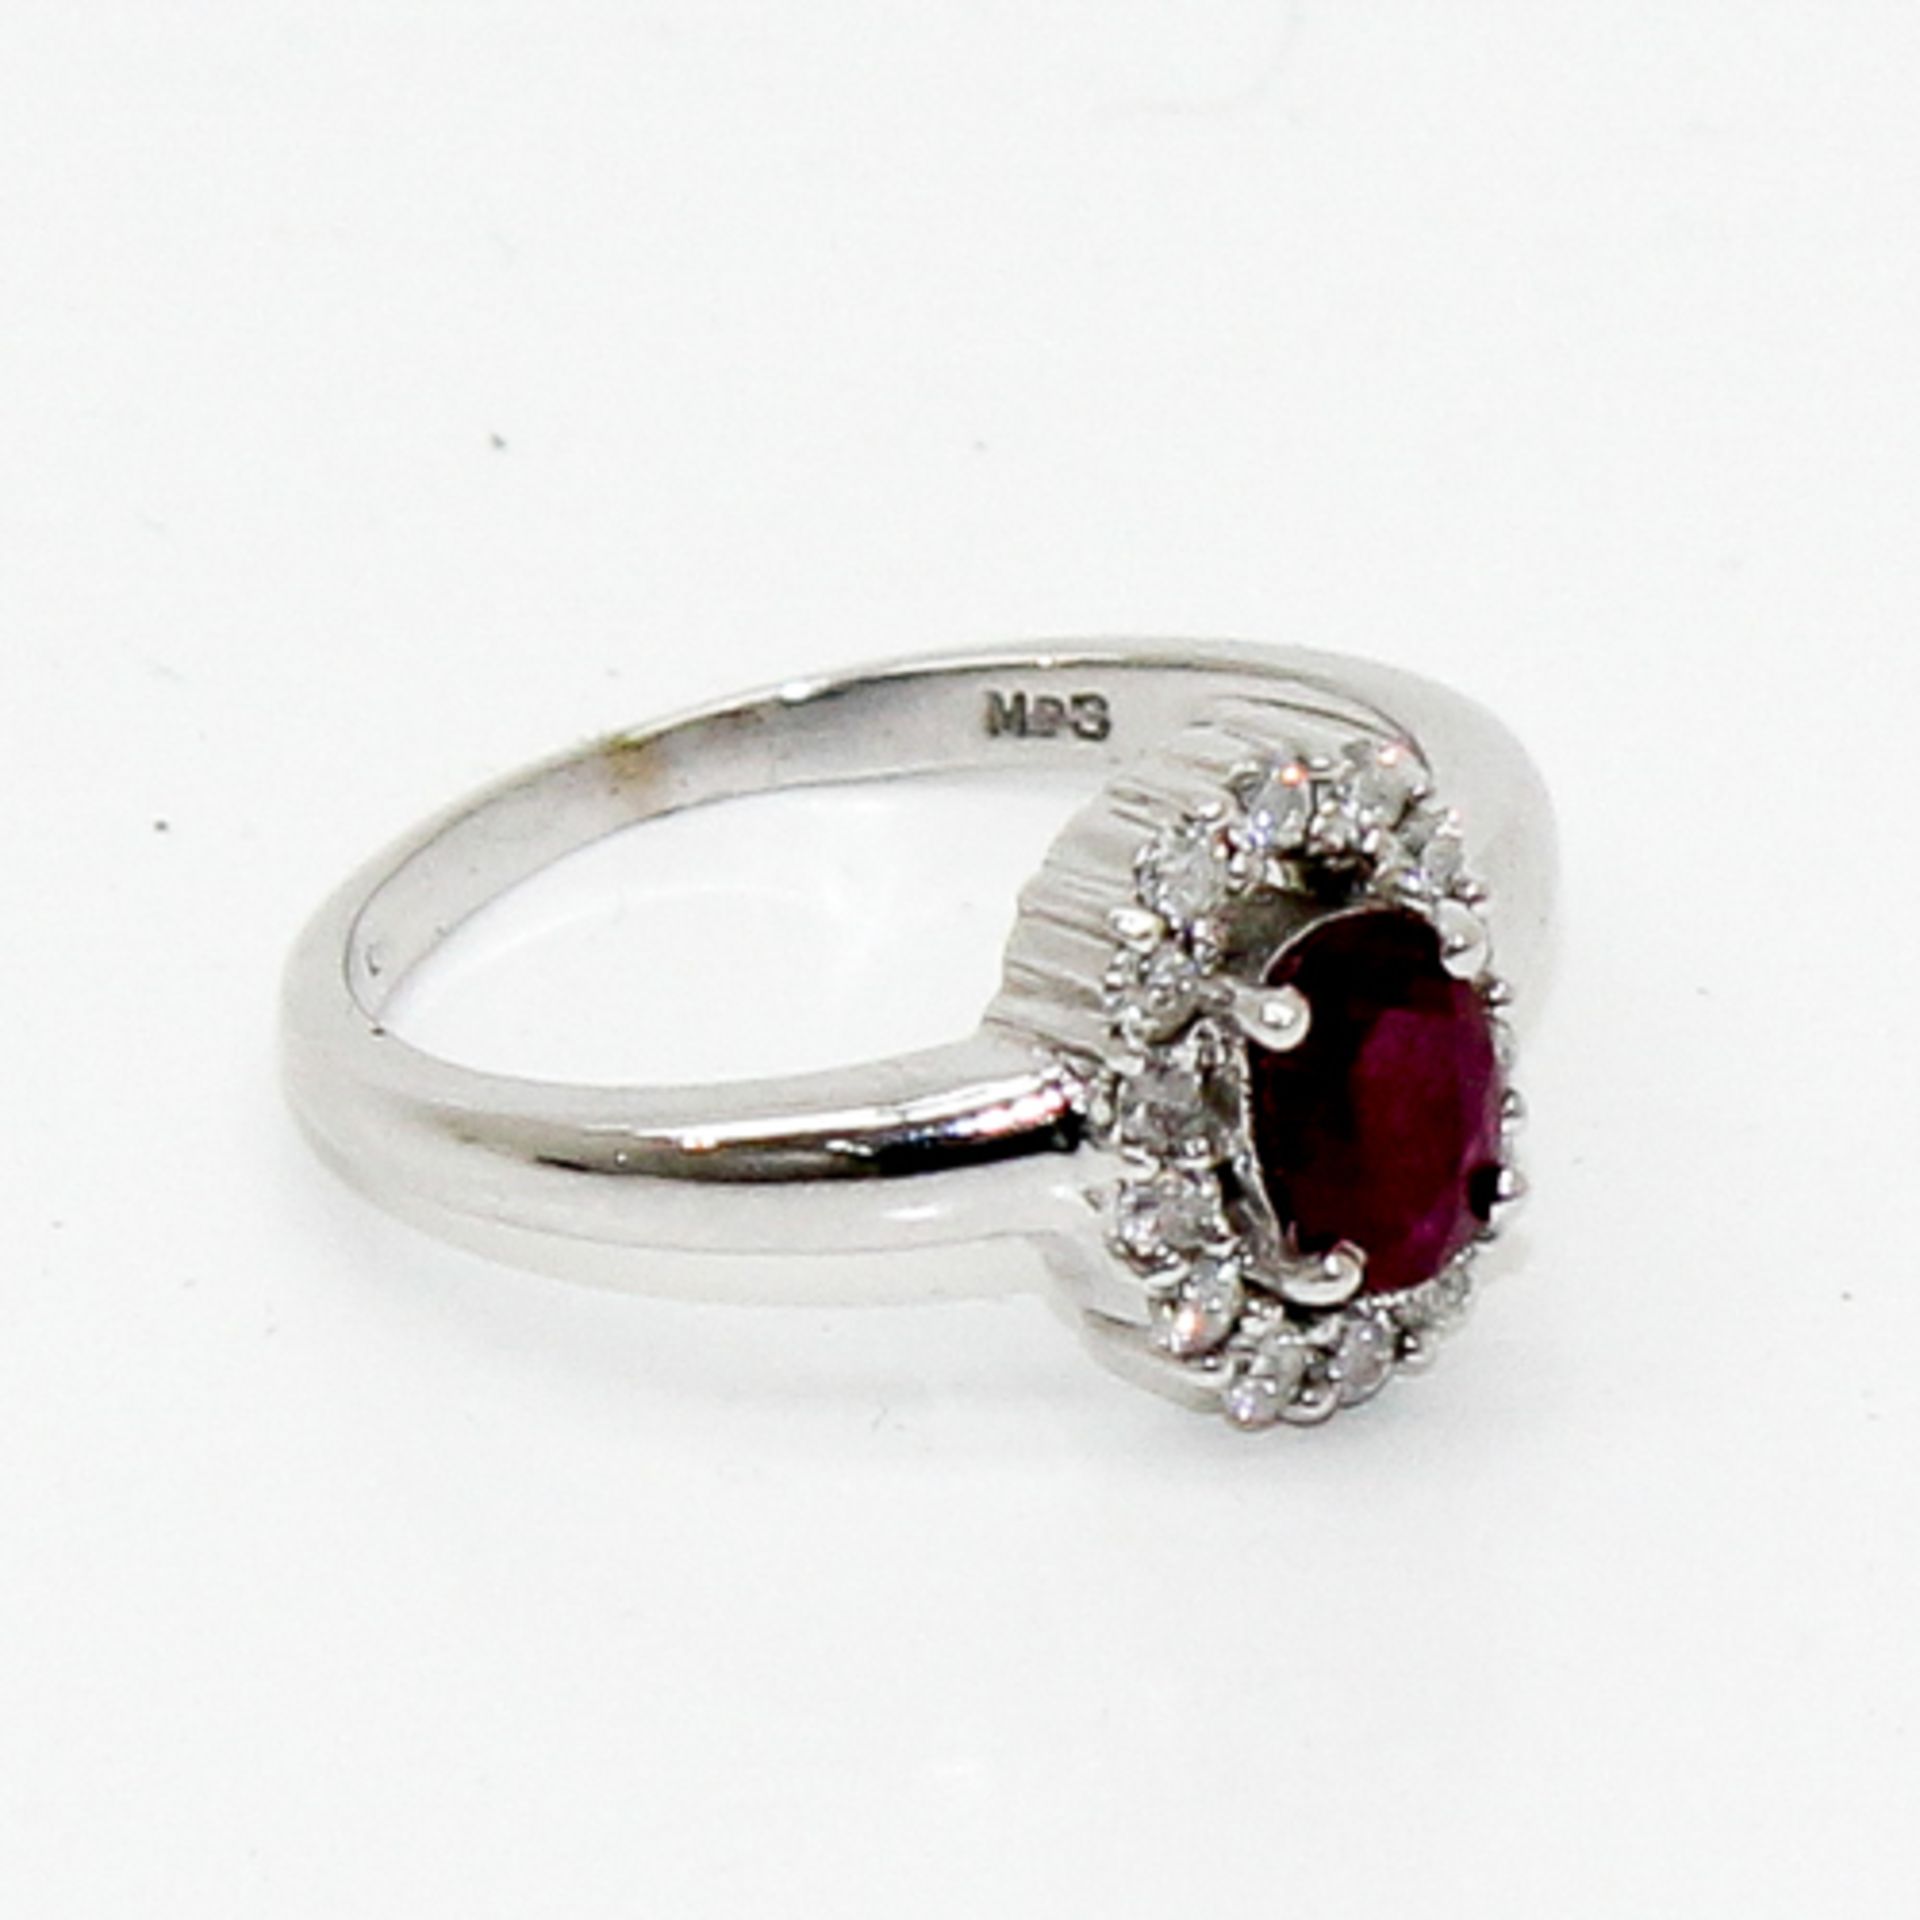 18KWG LADIES RUBY AND DIAMOND RING Central ruby is approximately 1.5 carat, diamond setting is